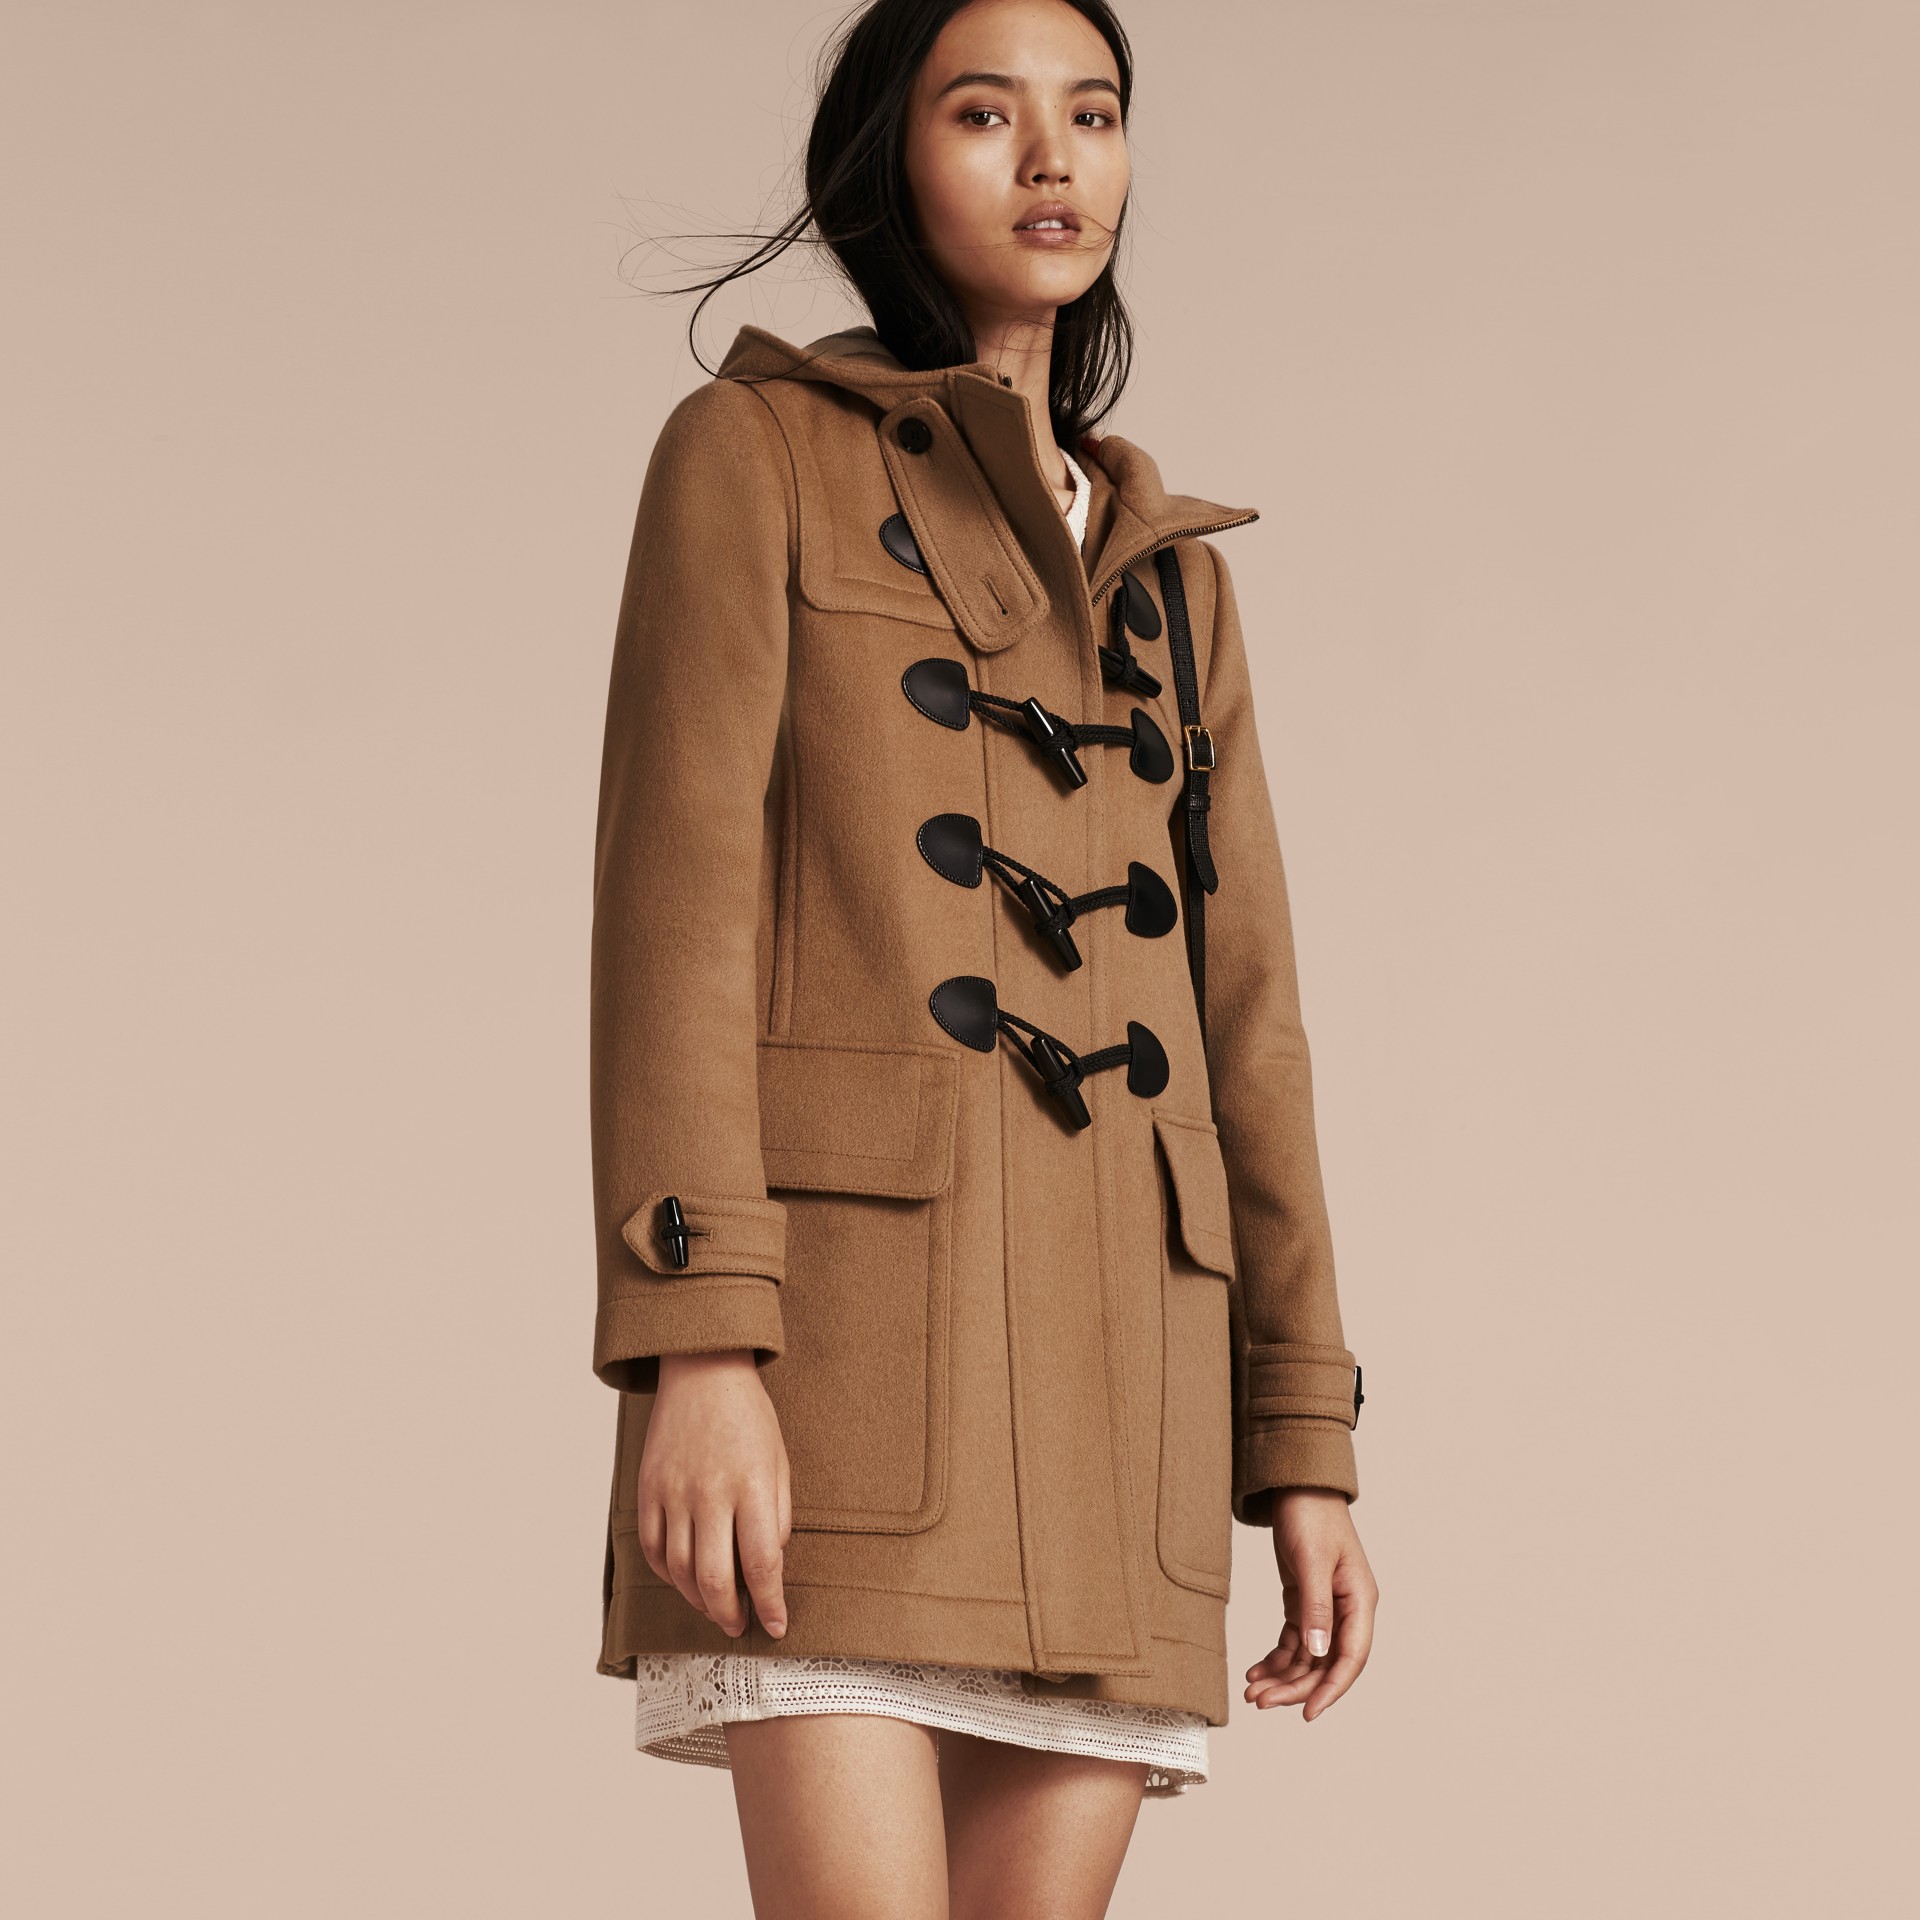 Straight Fit Duffle Coat in New Camel - Women | Burberry United States